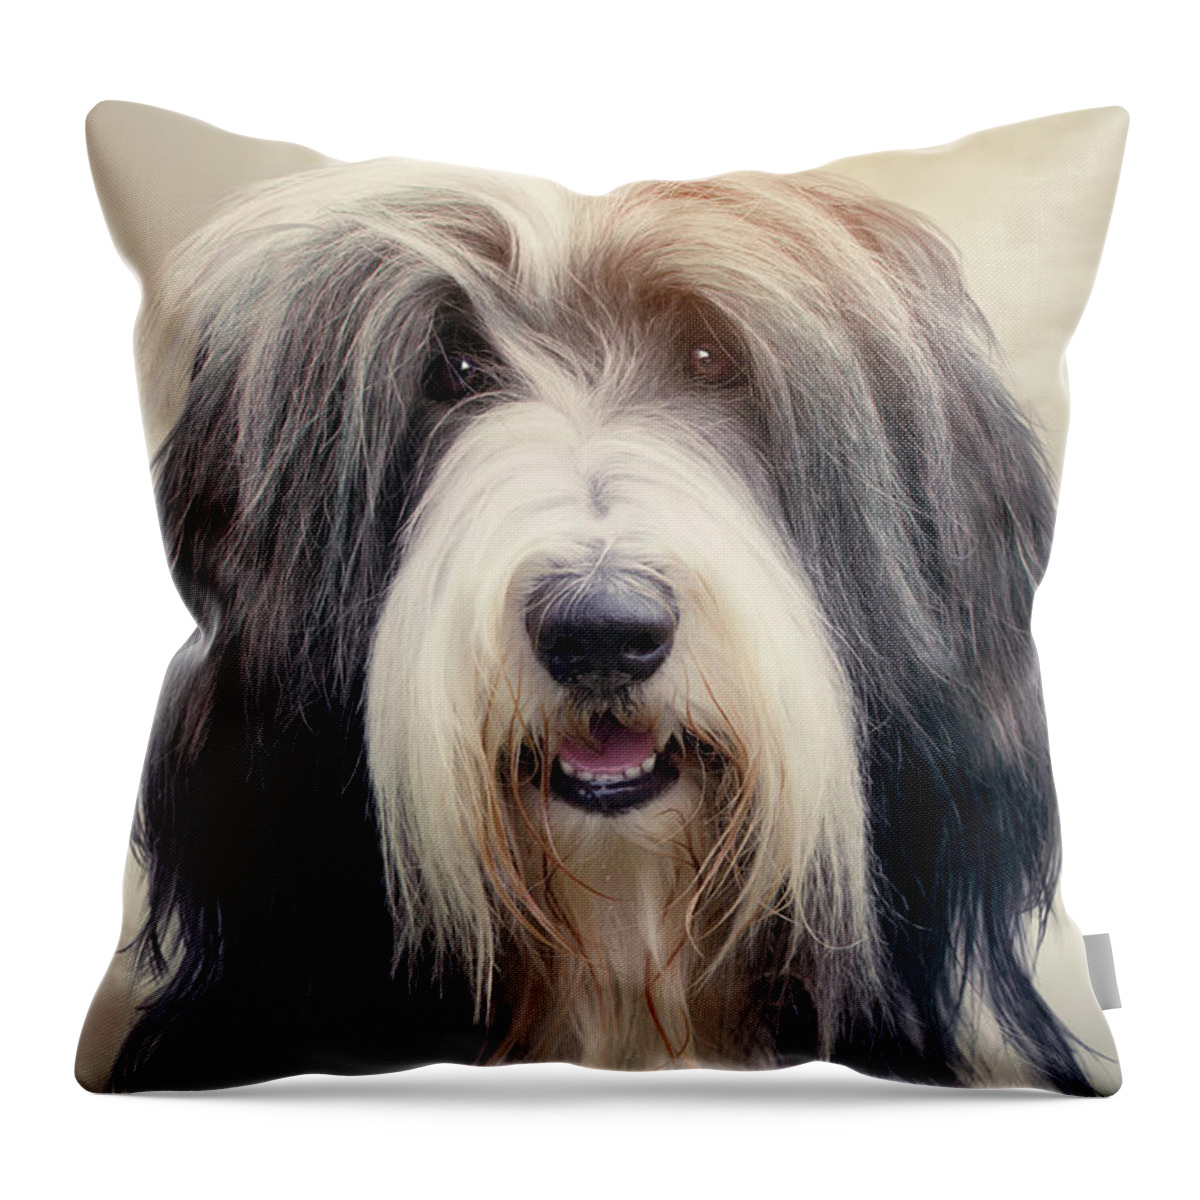 Dog Throw Pillow featuring the photograph Shaggy Dog by Ethiriel Photography